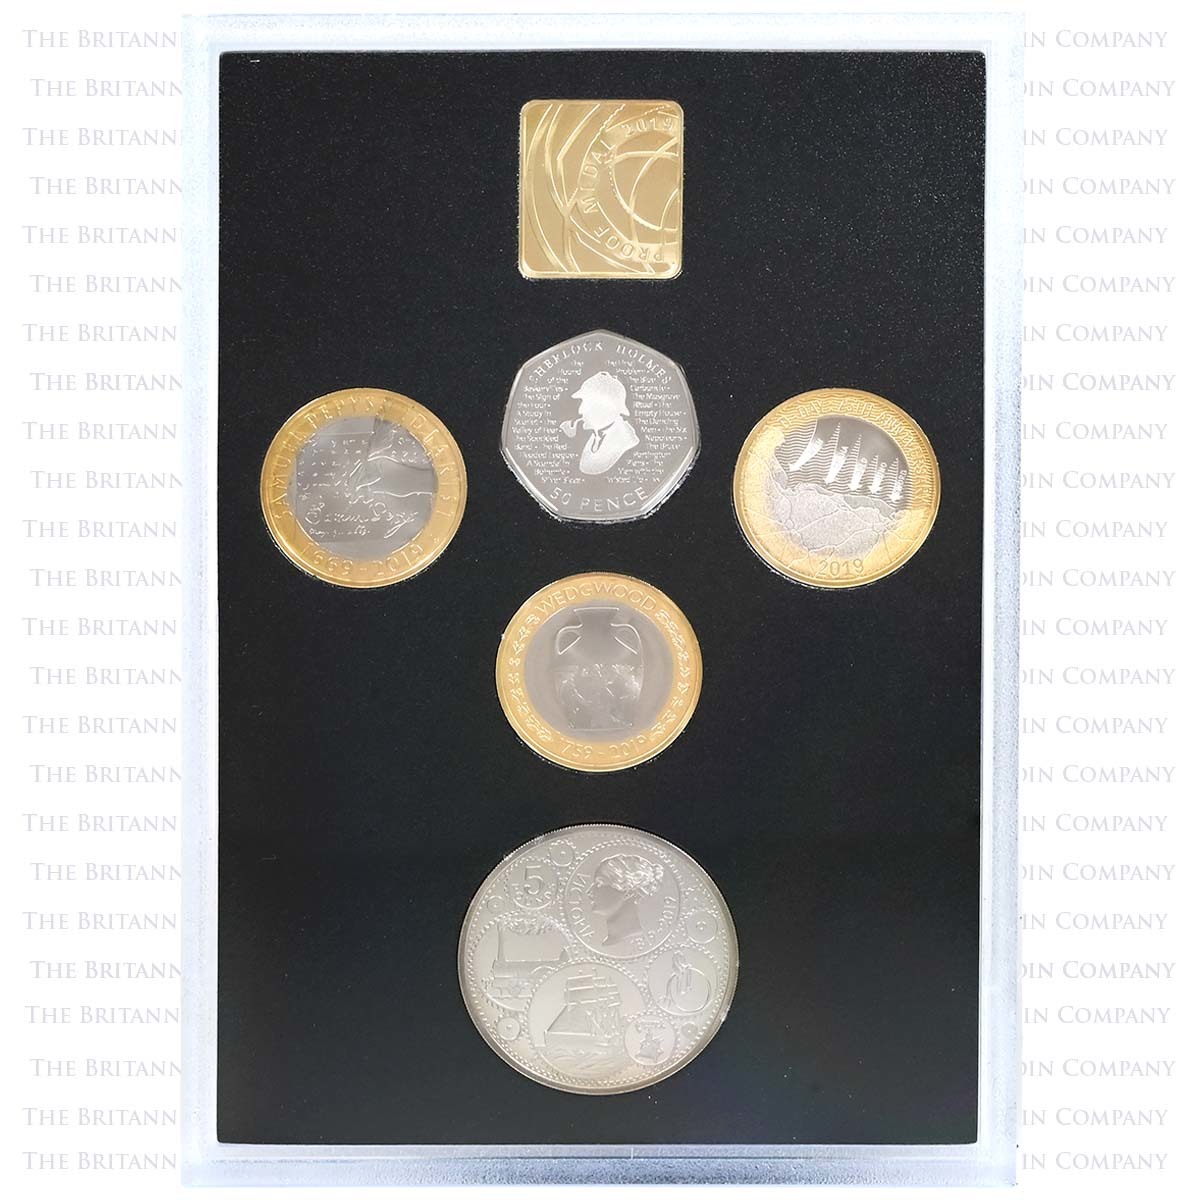 2019-proof-coin-set-collector-edtition-002-m